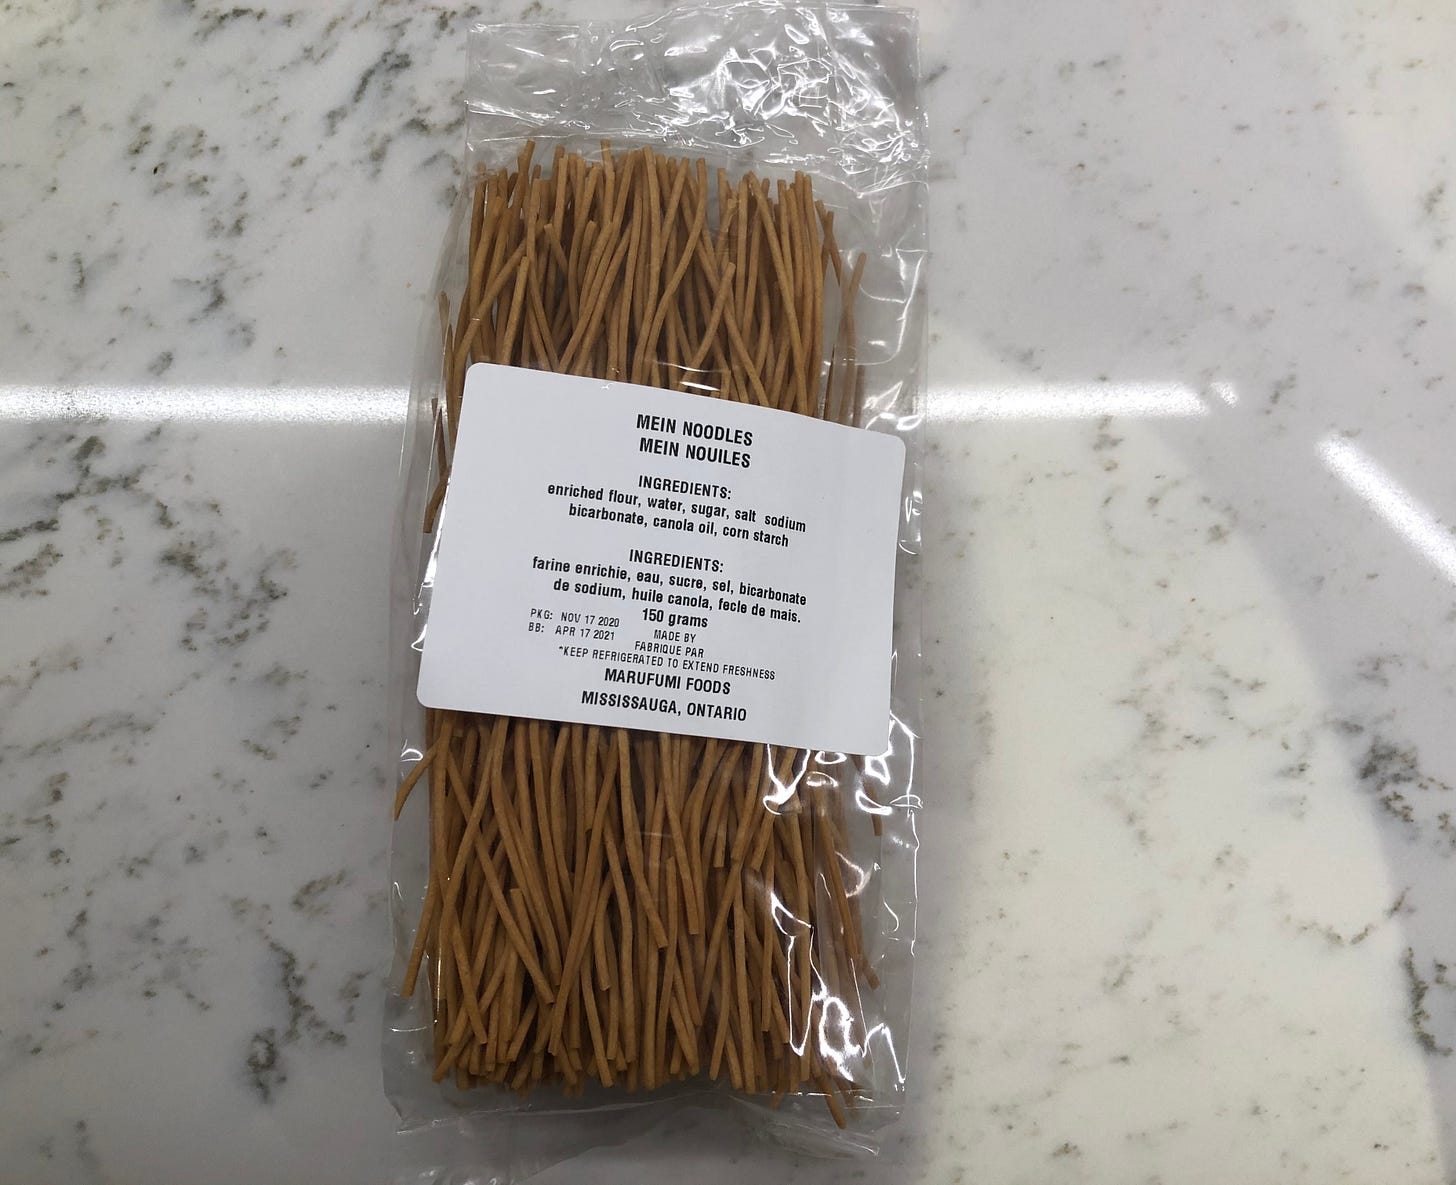 A package of mein noodles